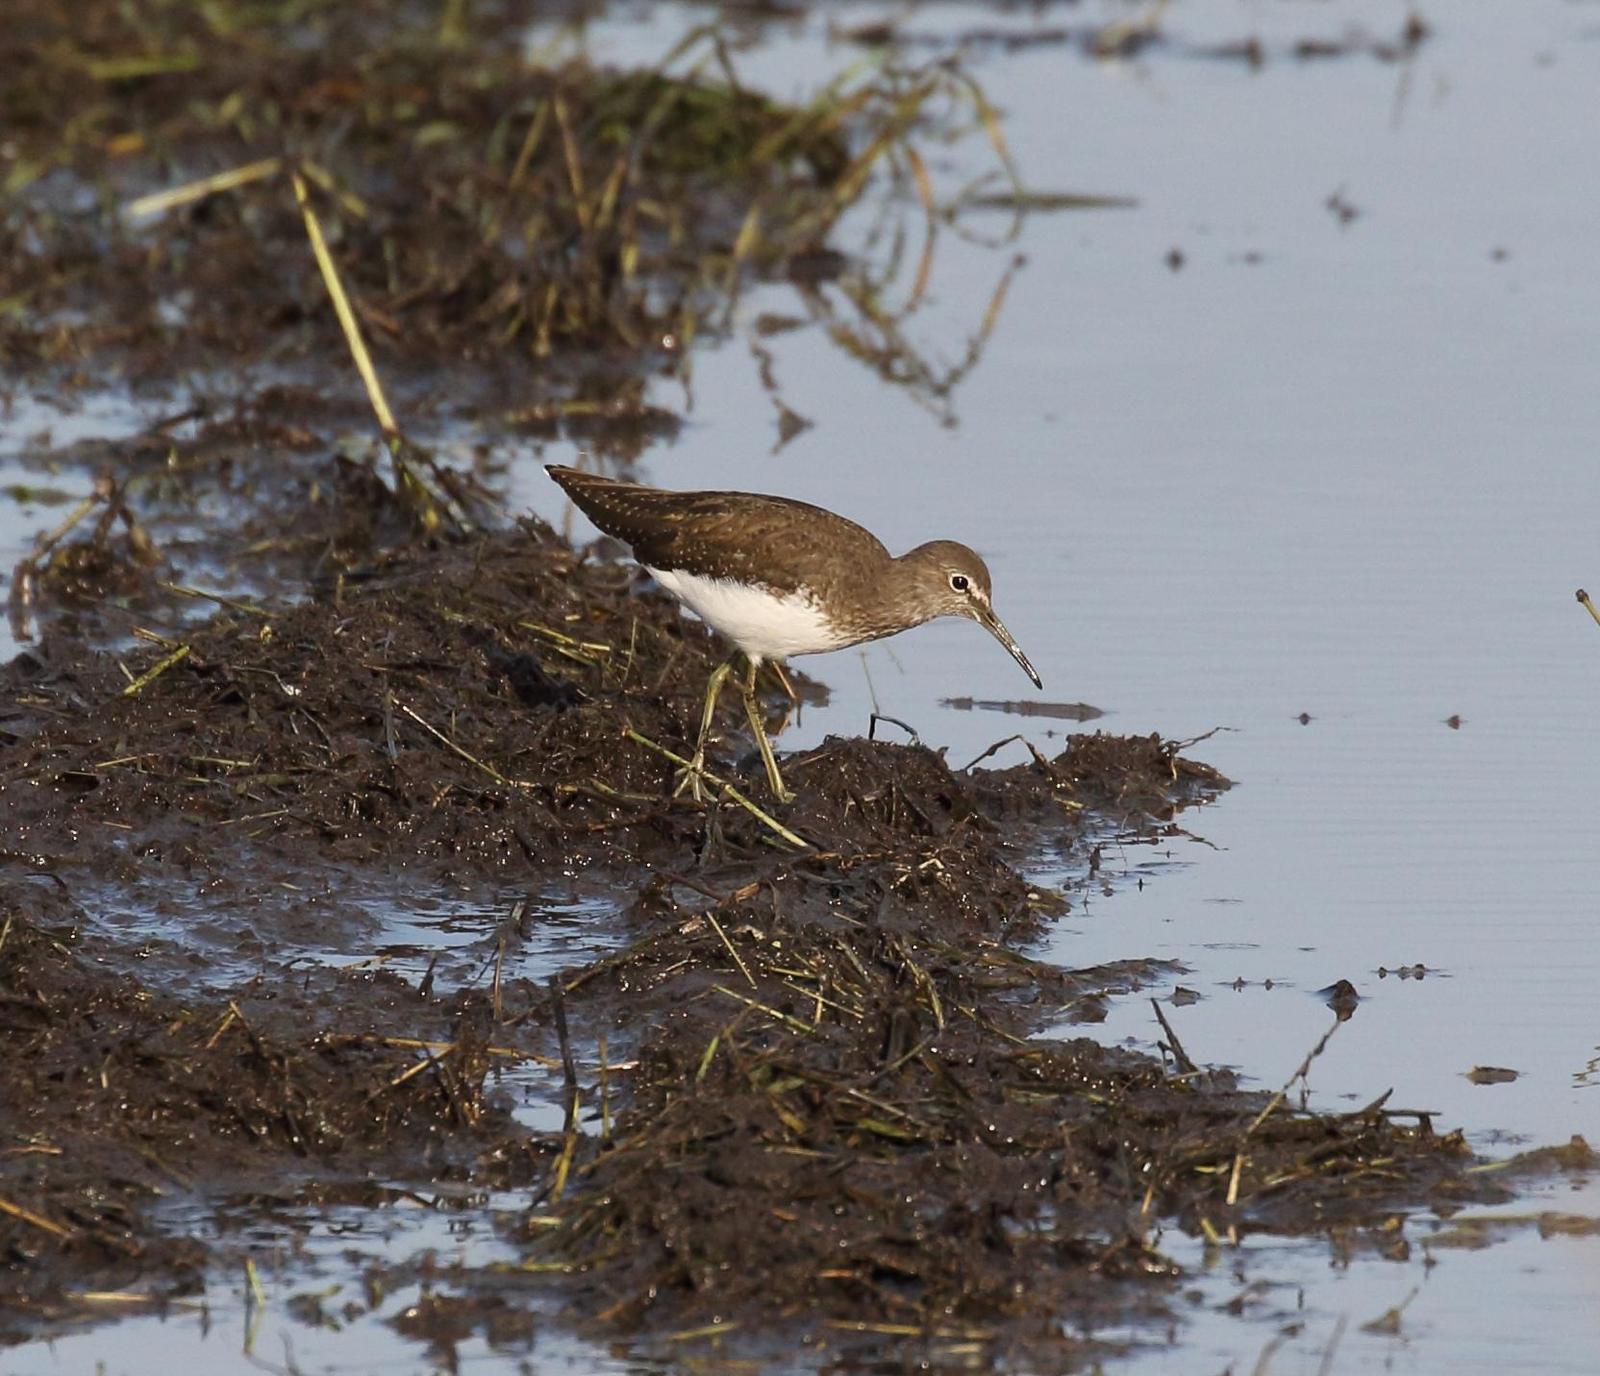 Green Sandpiper Photo by Nate Dias